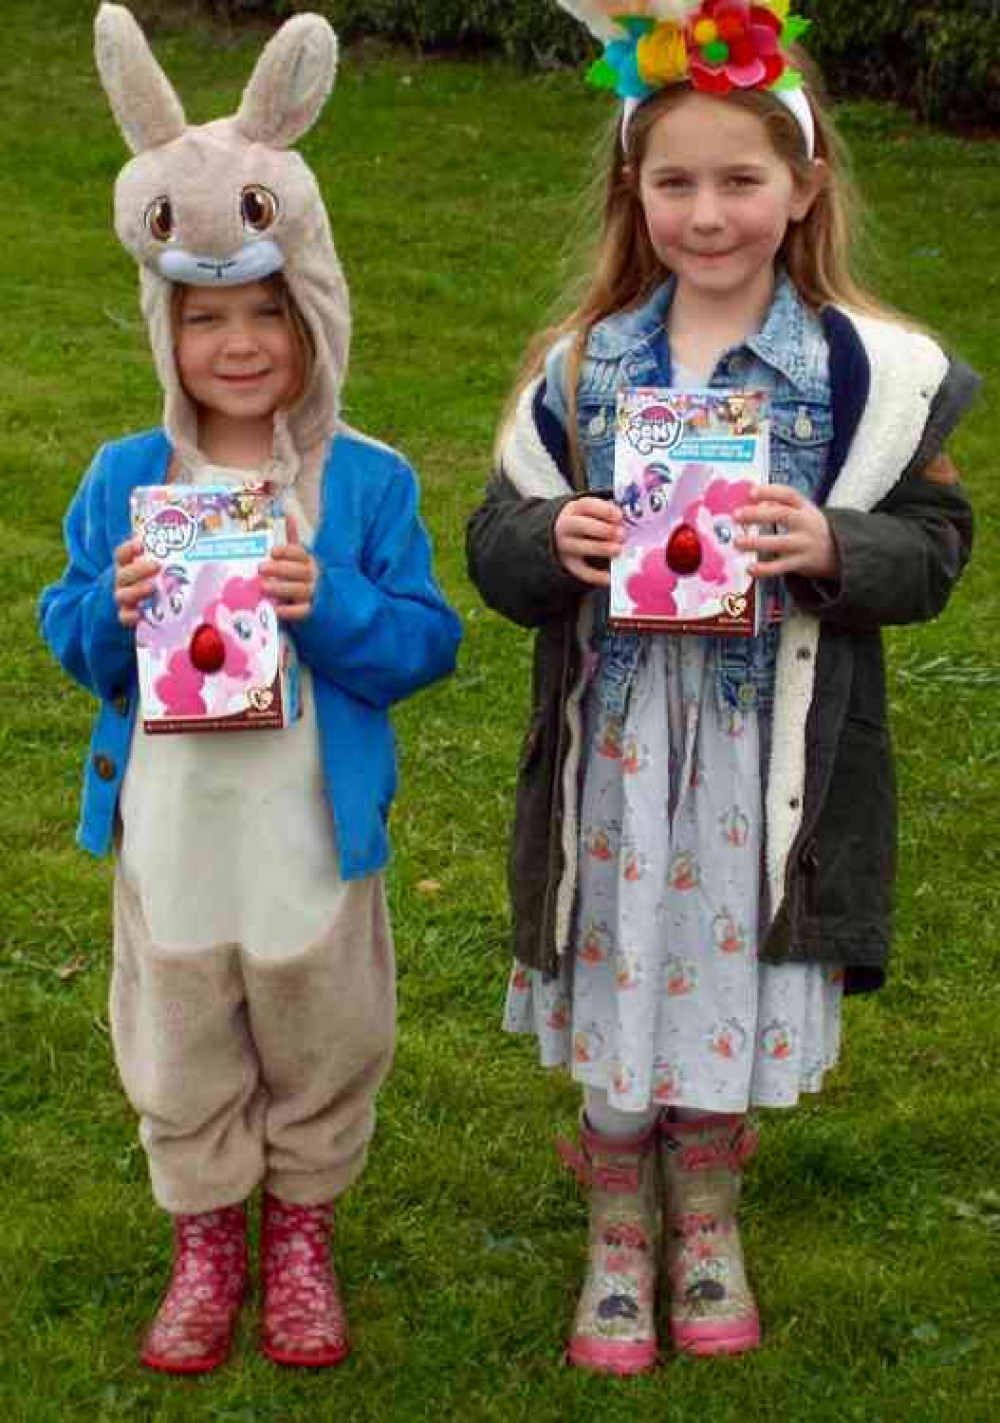 Memories of last years Easter Egg hunt at the Shotley Rose.